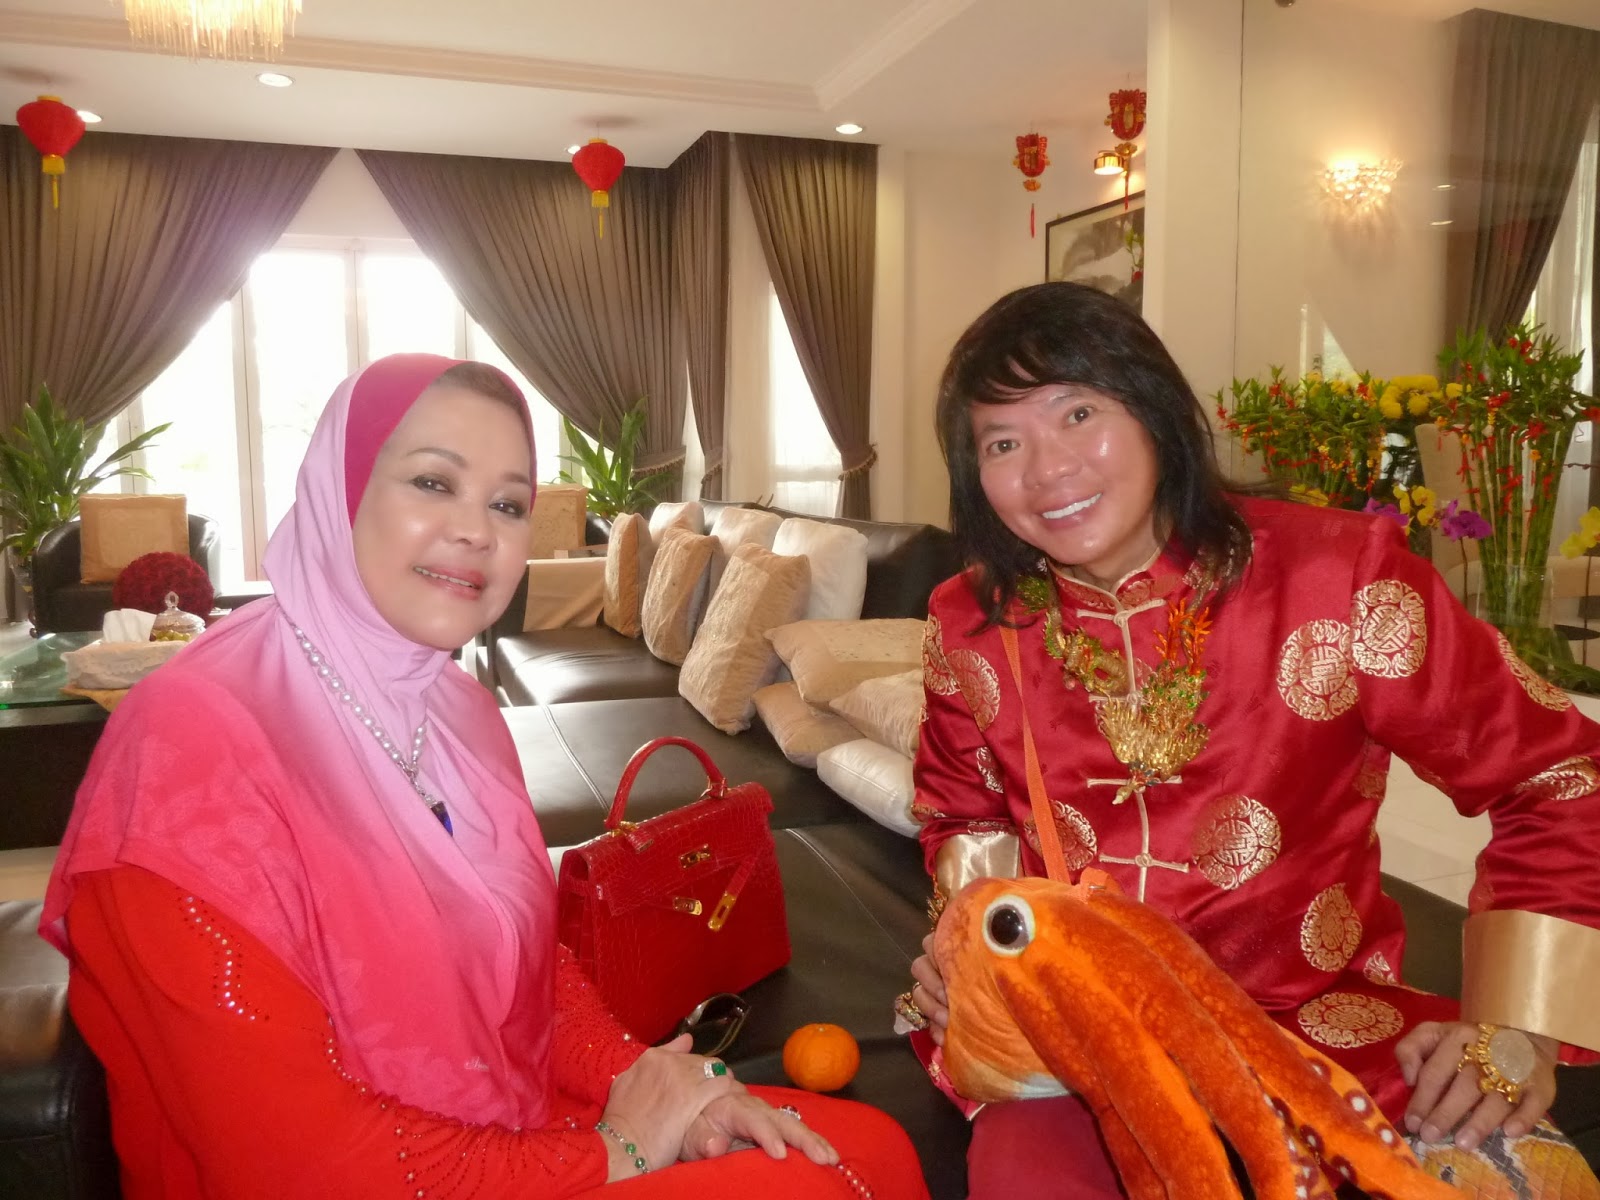 Kee Hua Chee Live!: PART 3; THE QUEEN OF MALAYSIA ATTENDED ...